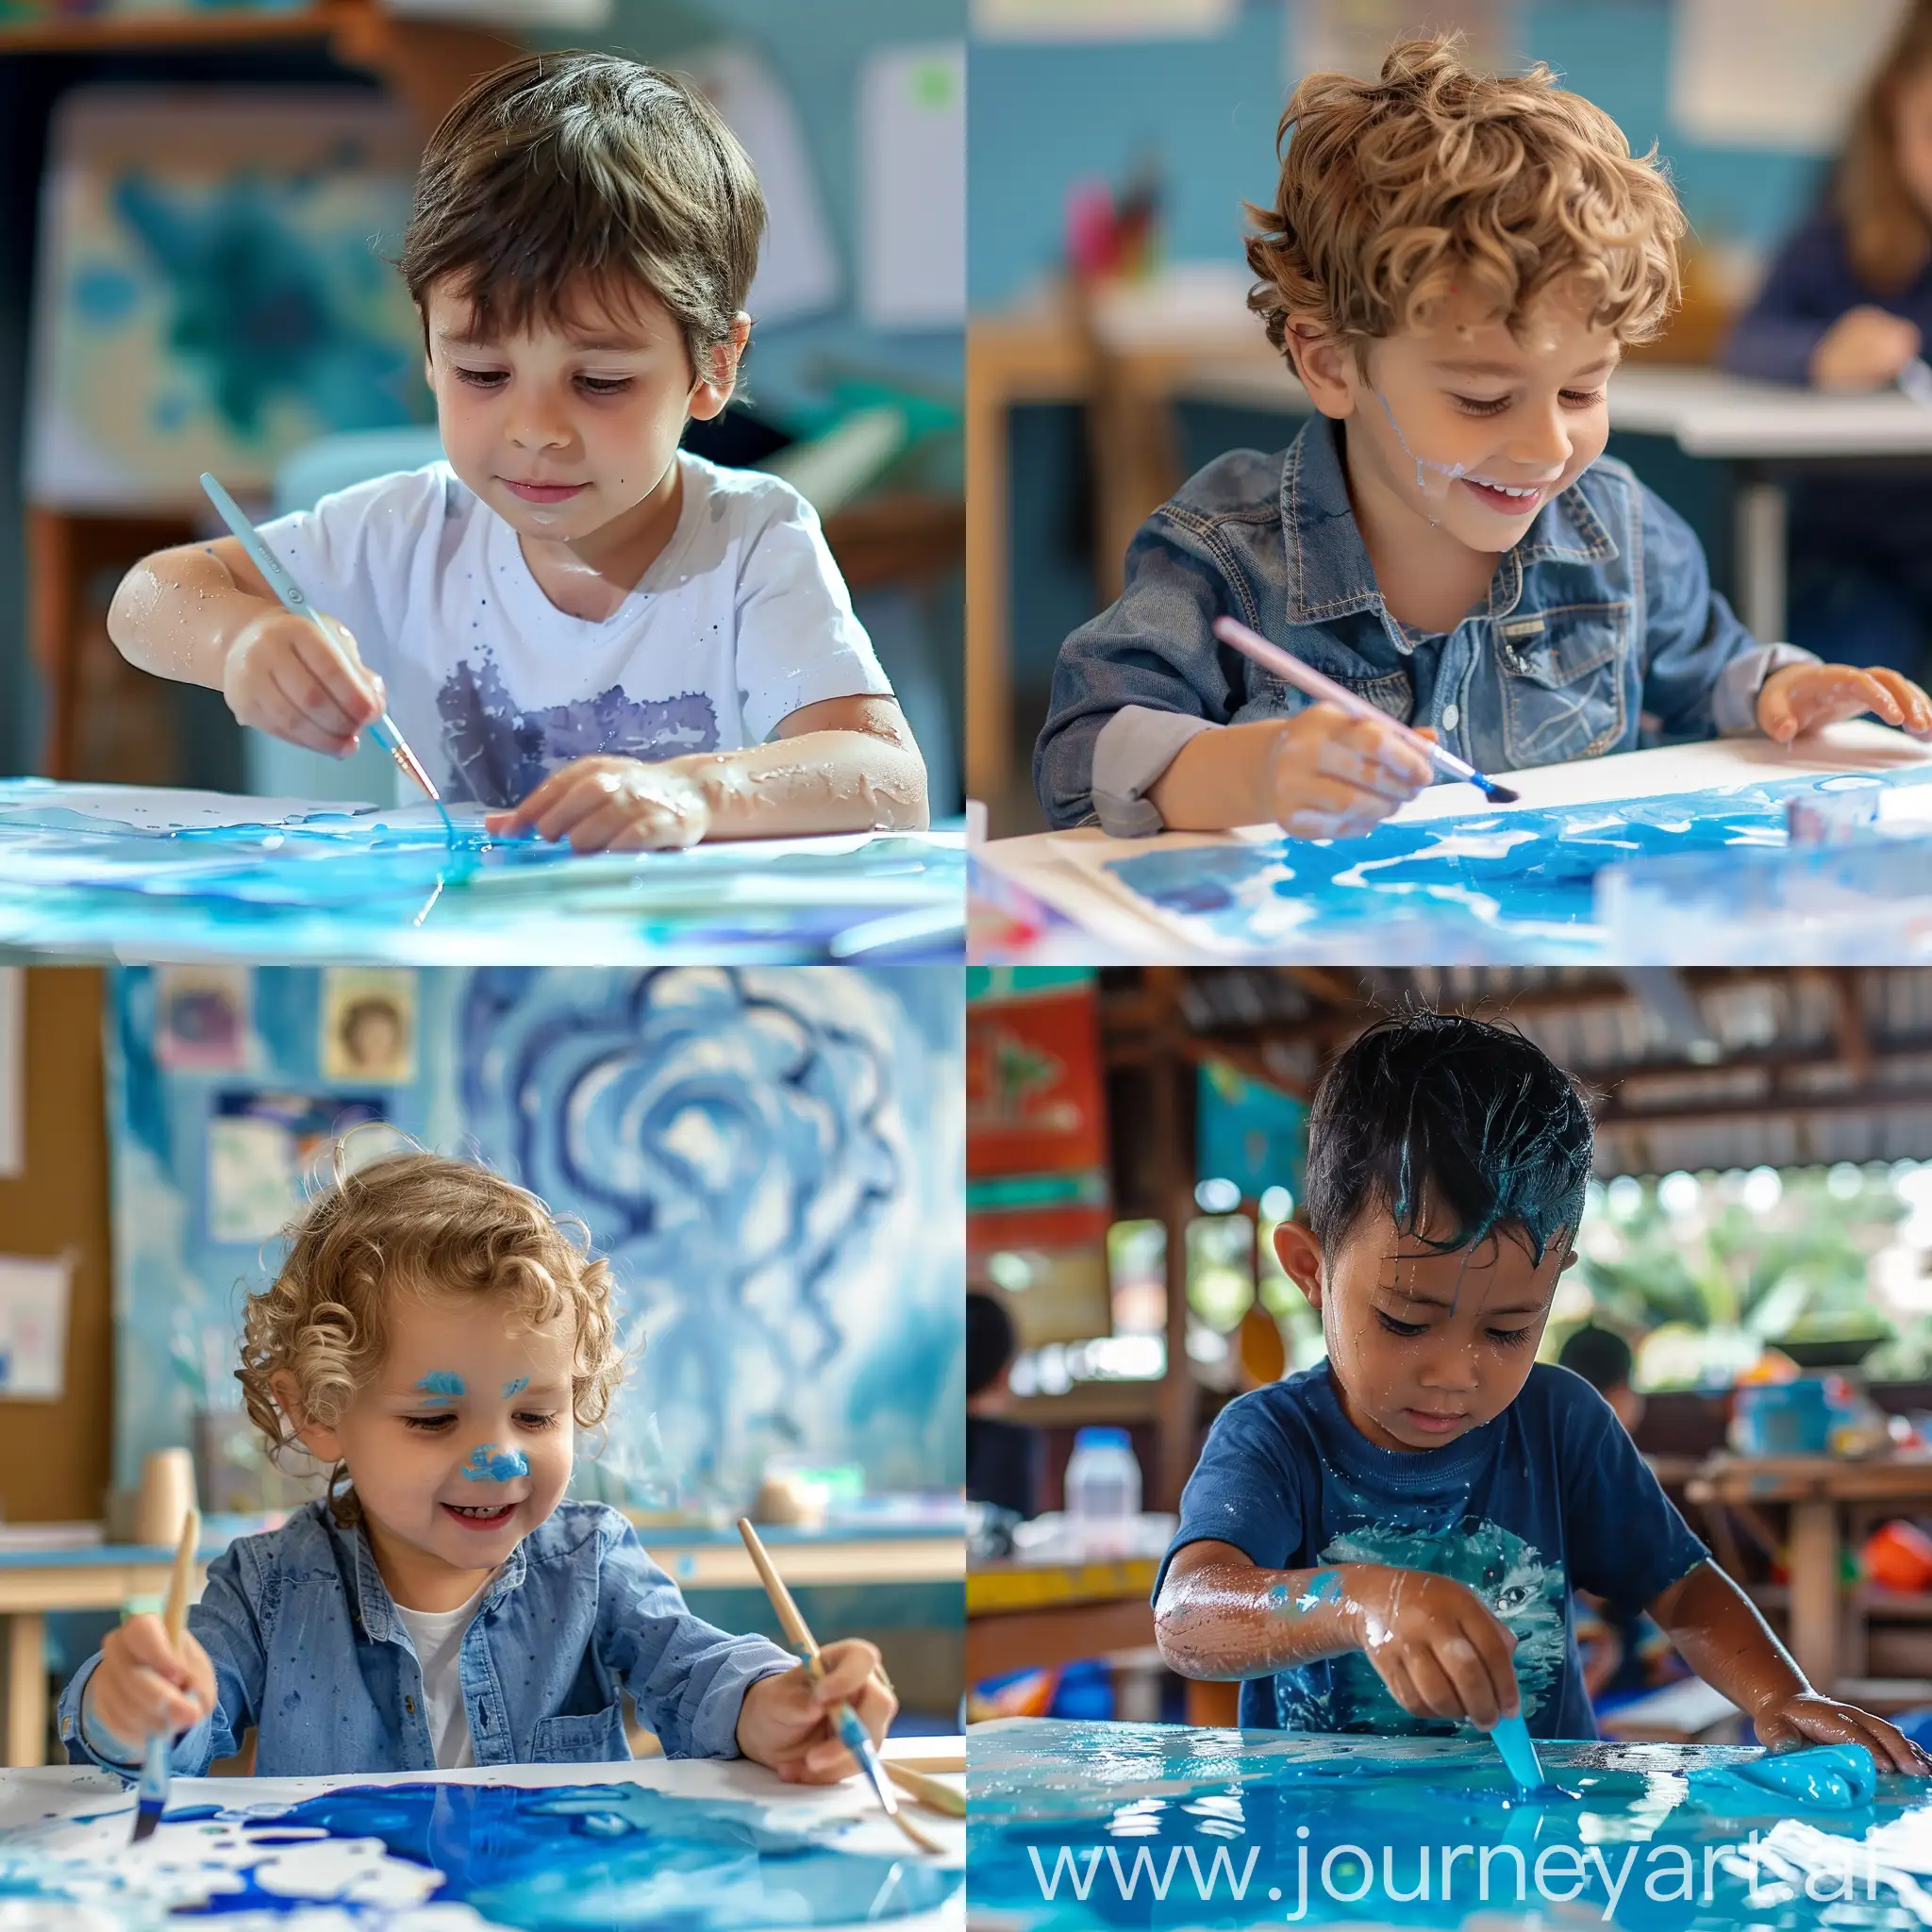 Child-Painting-with-Watercolors-in-Classroom-Setting